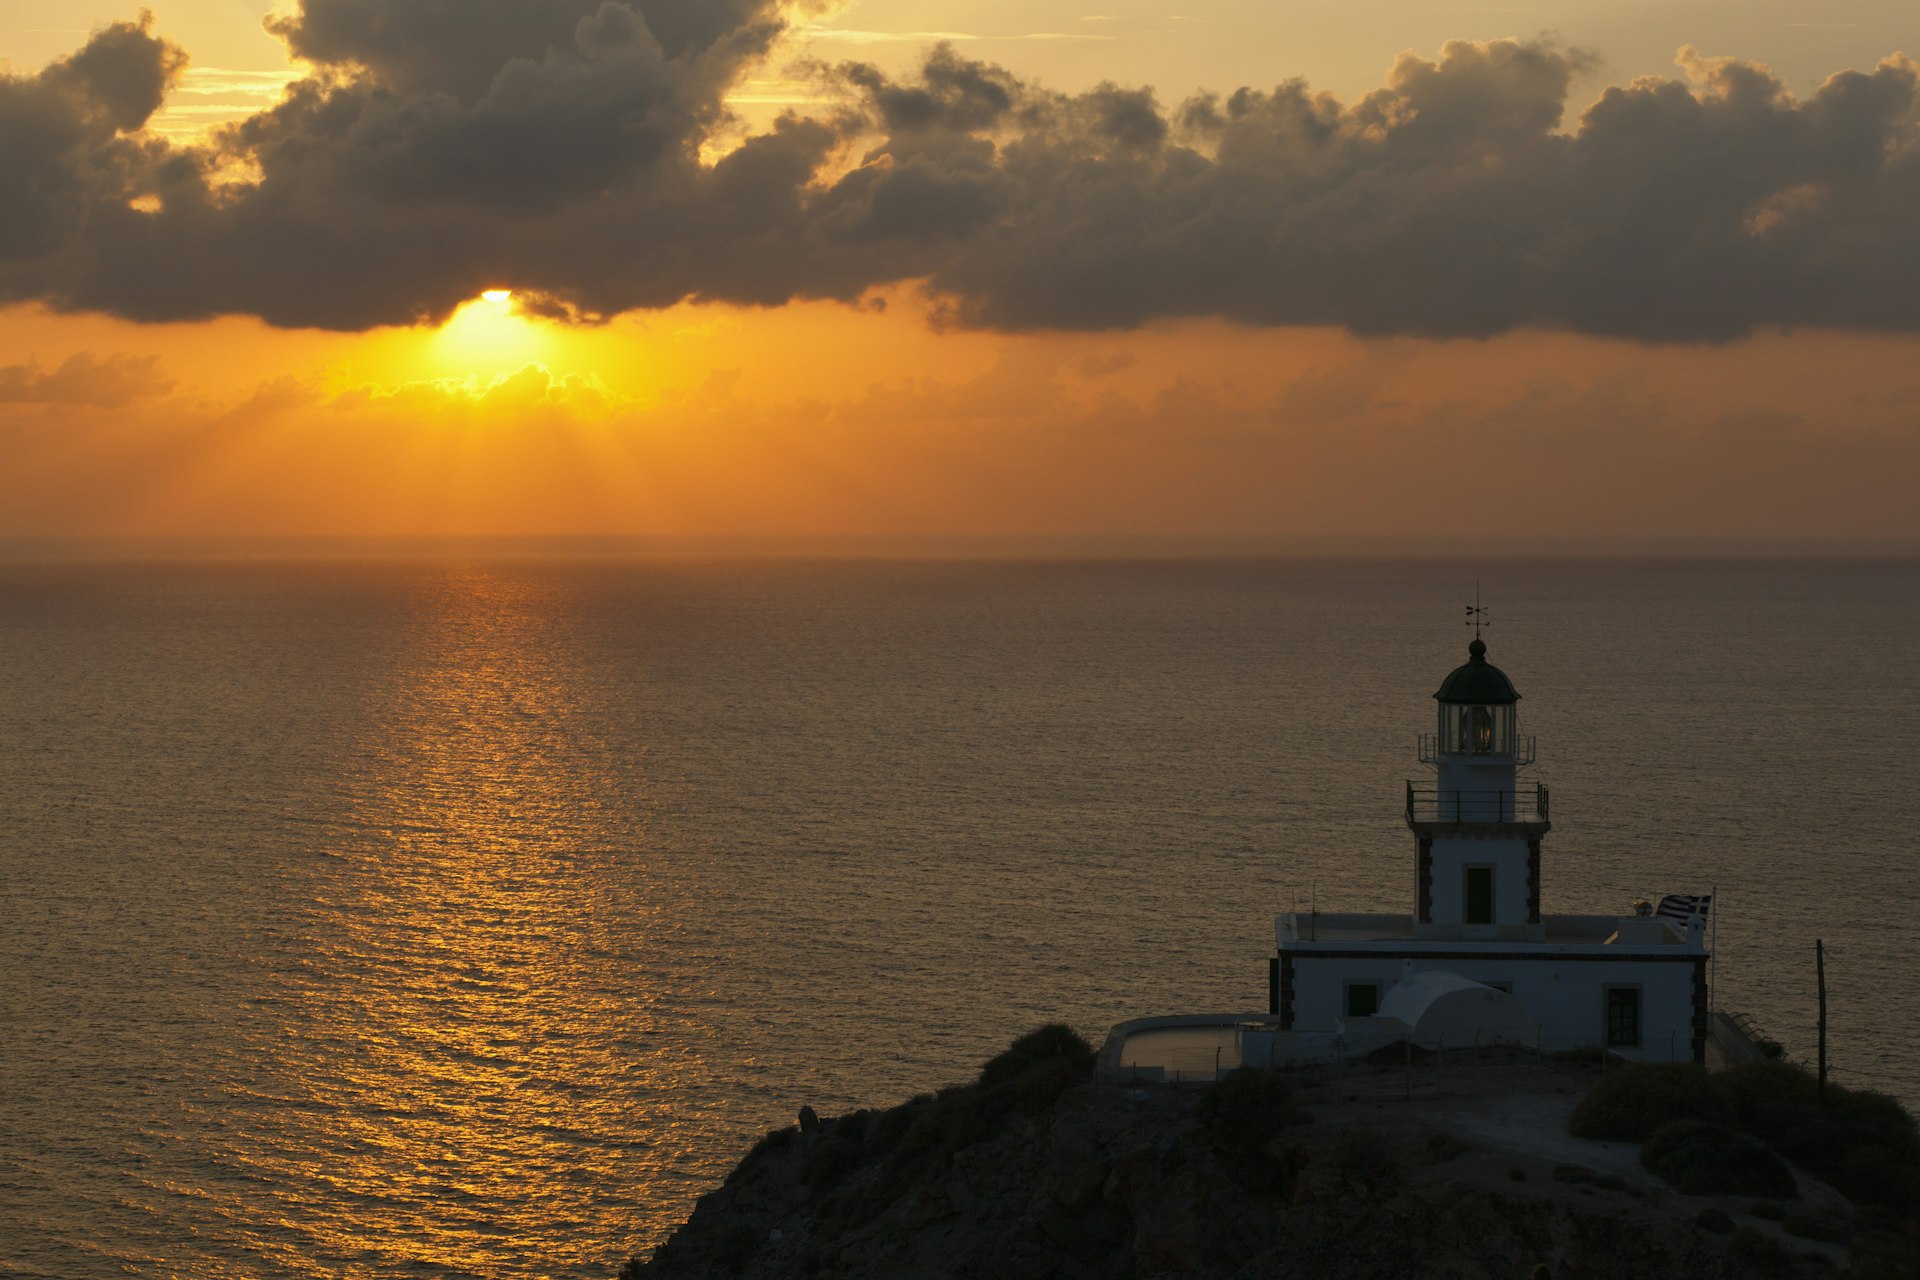 A squat white lighthouse at the edge of a cliff with the sea beyond, and the sky glowing orange as the sun sets